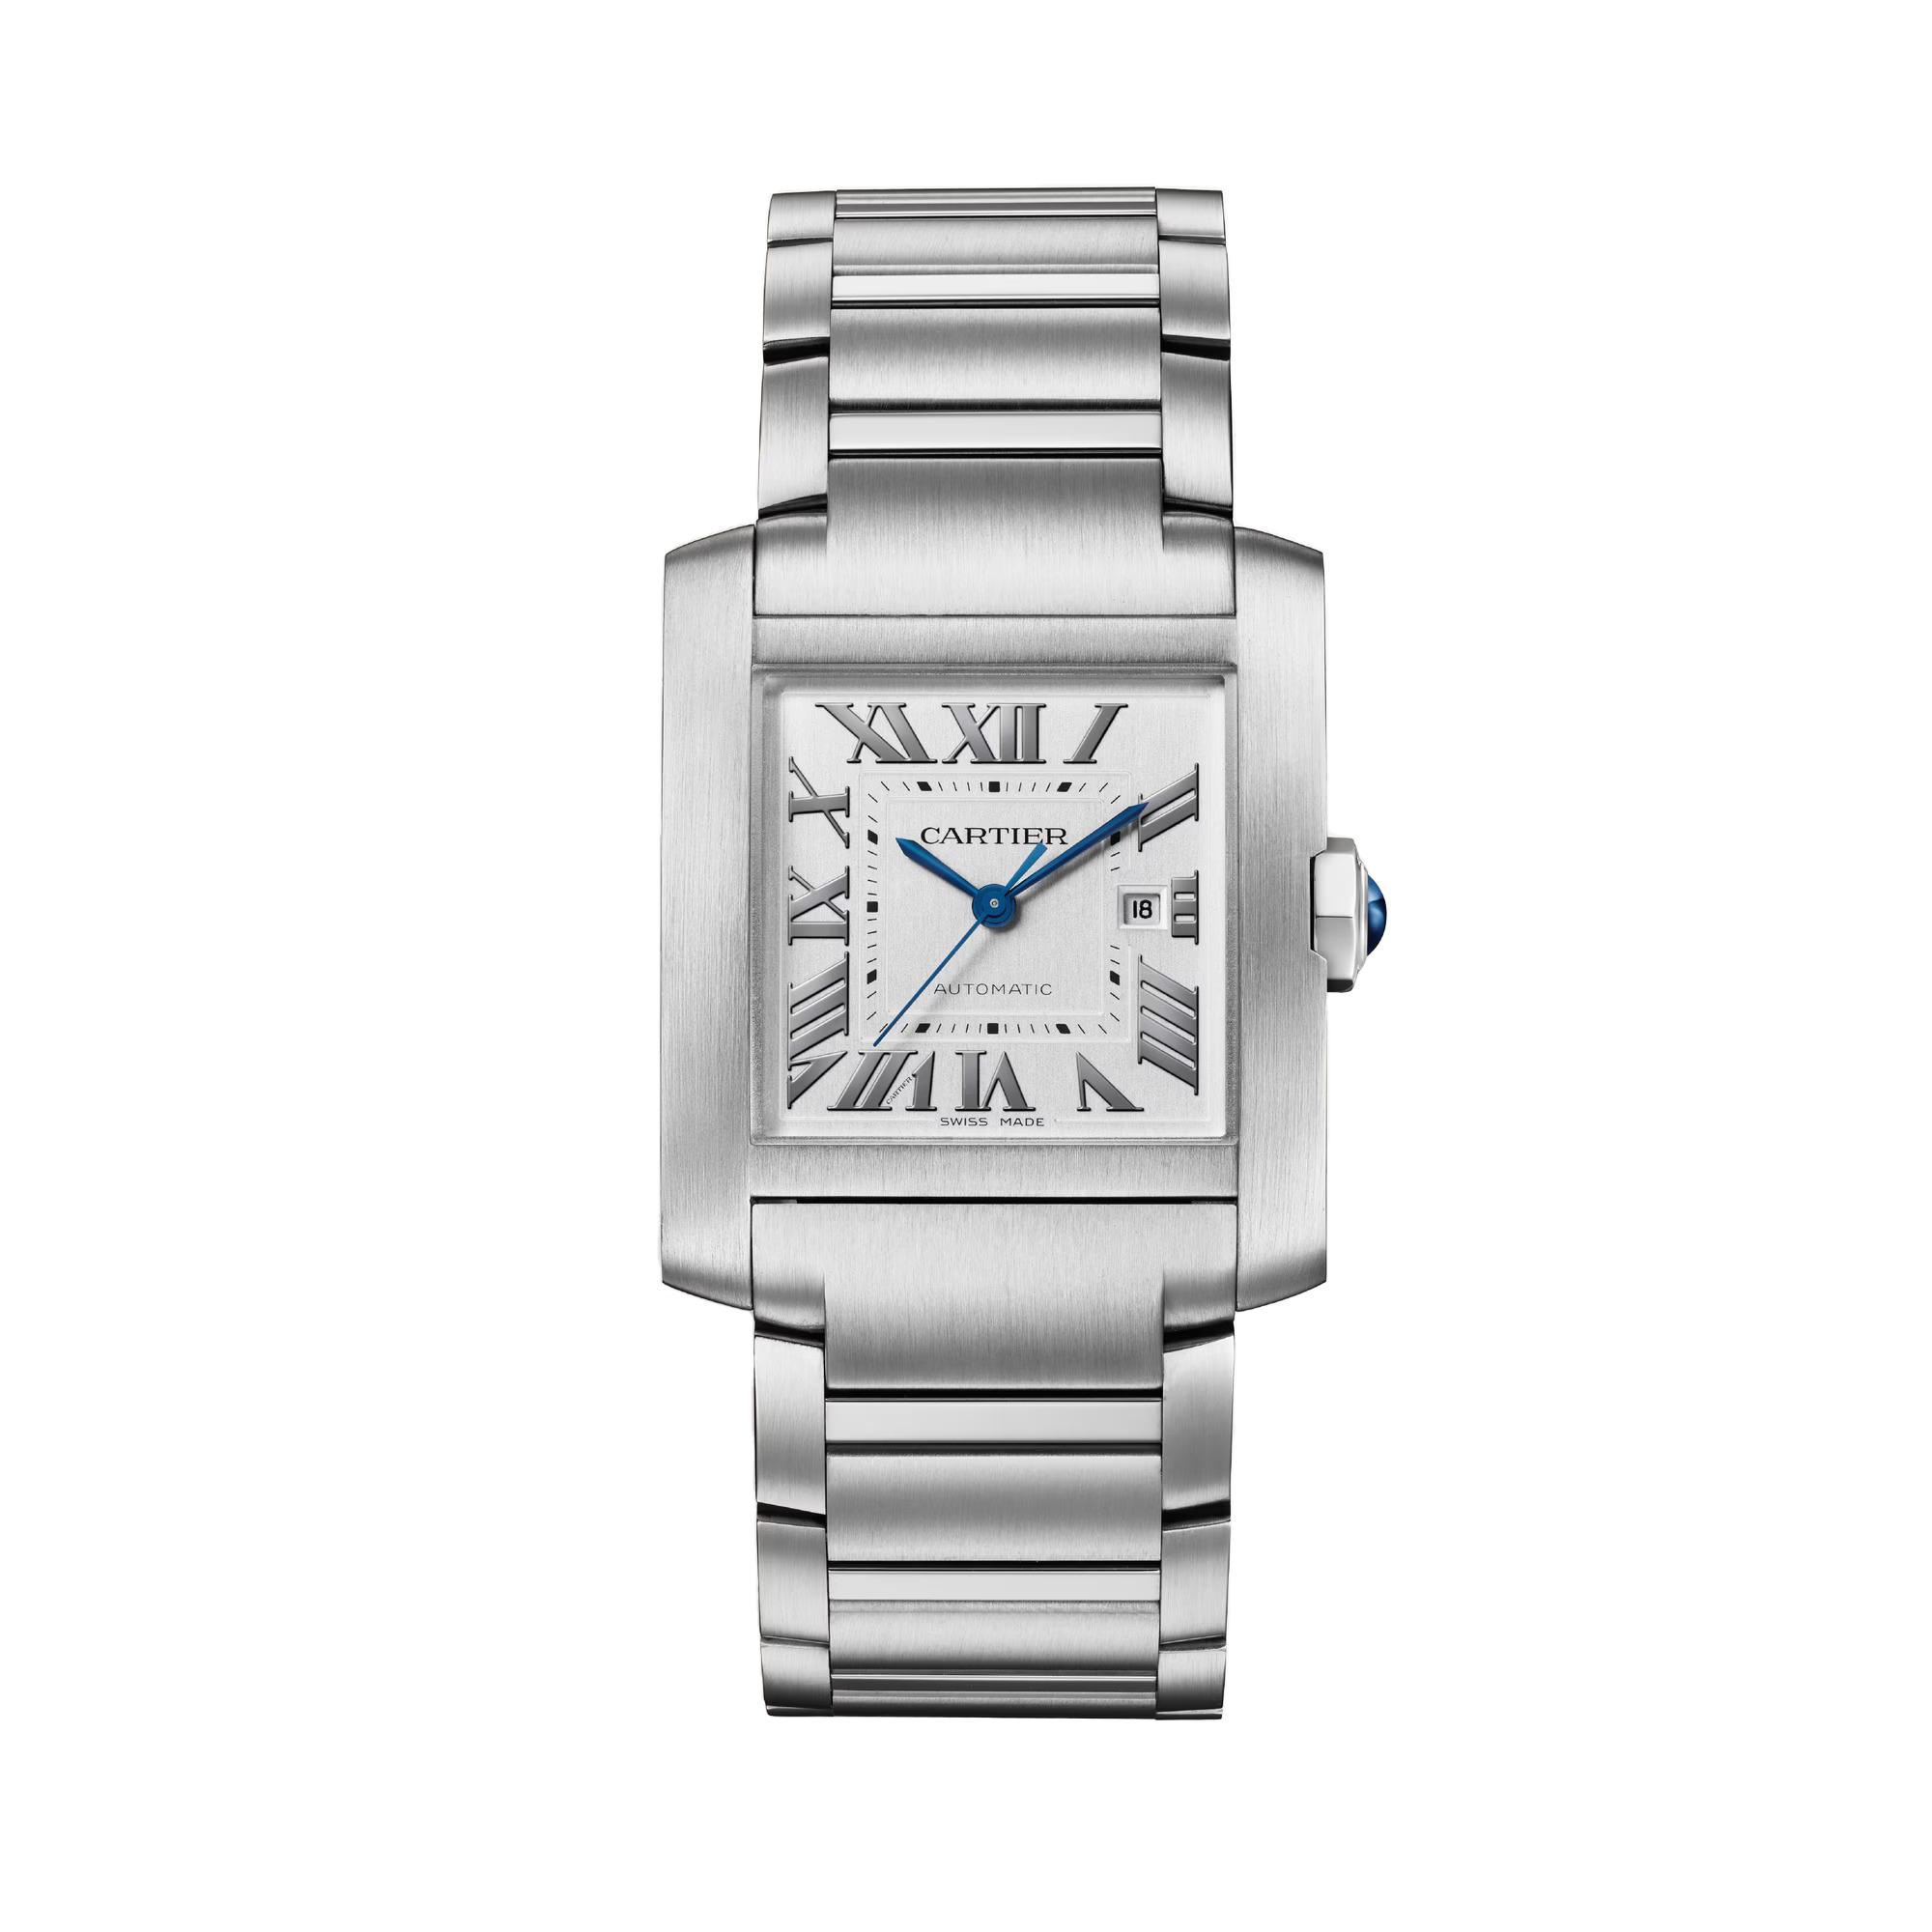 Cartier Tank Francaise Watch, large model